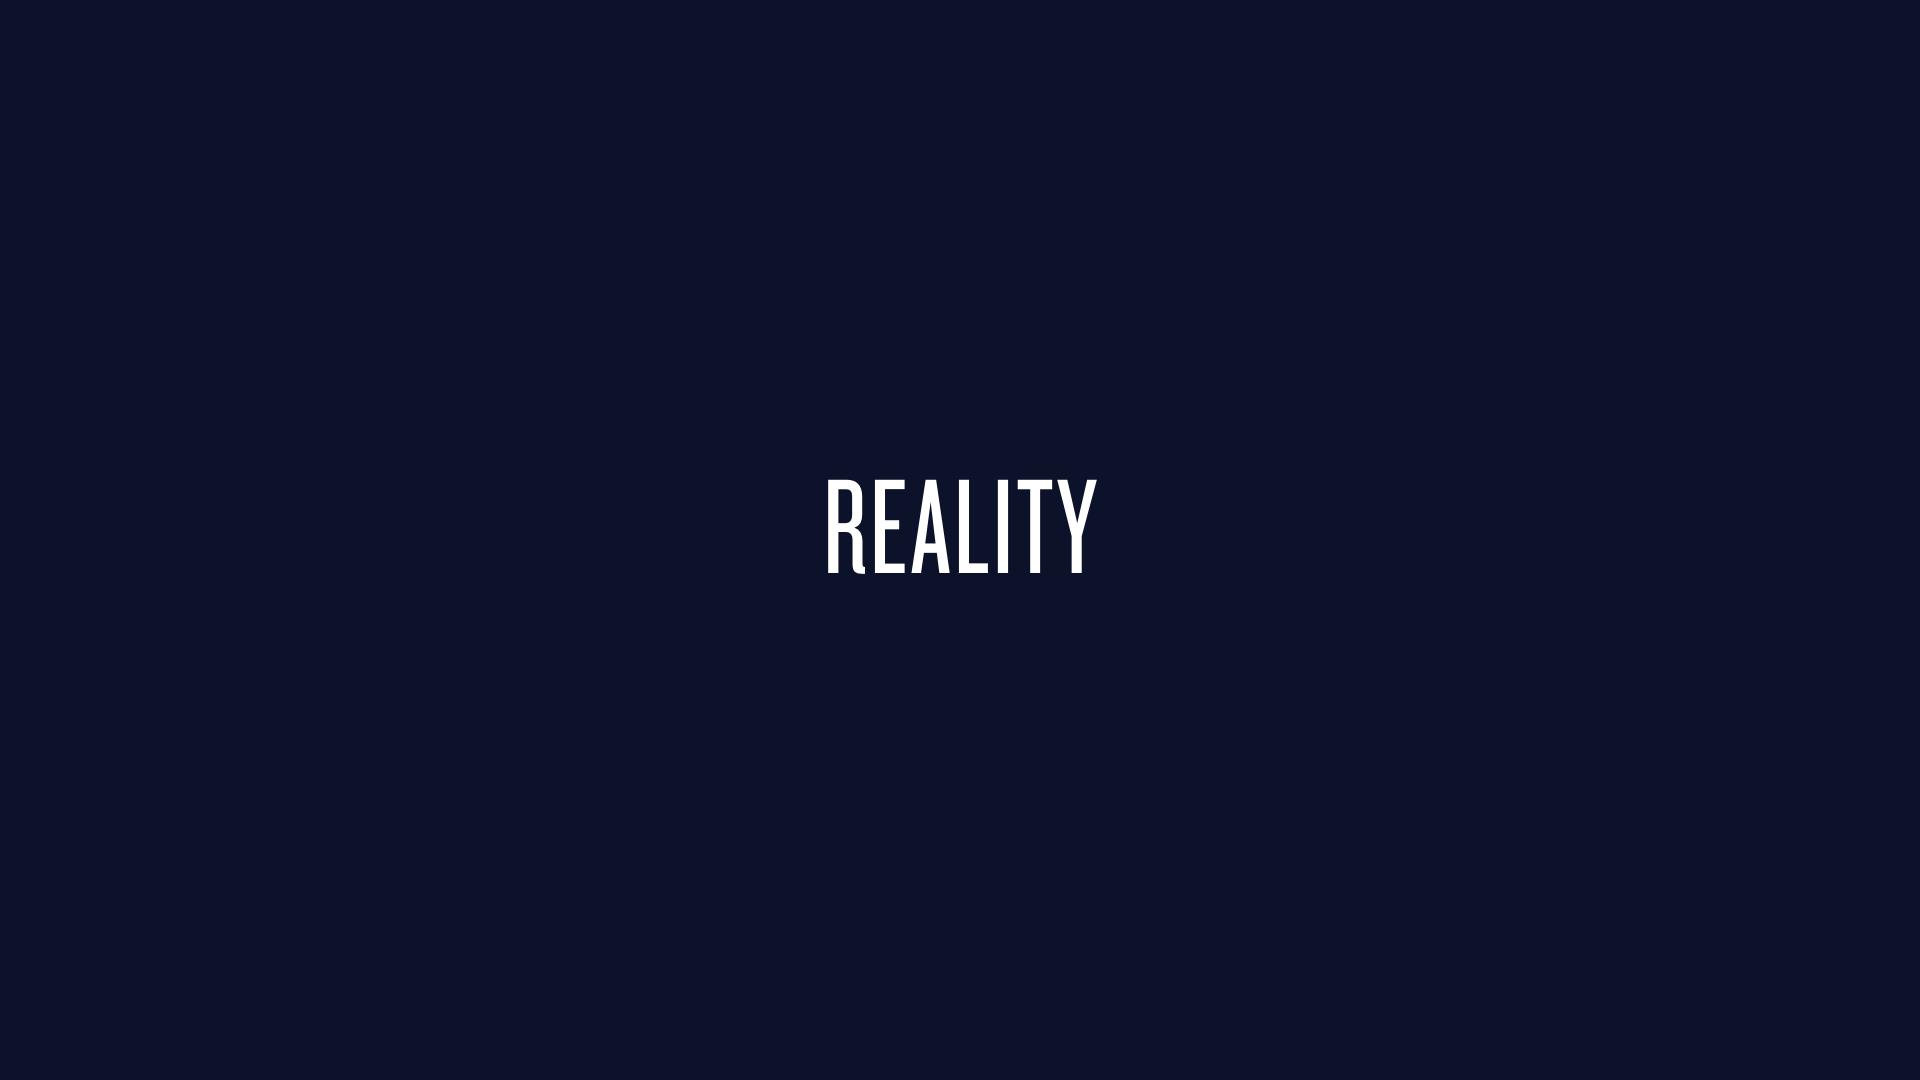 Submitting to reality